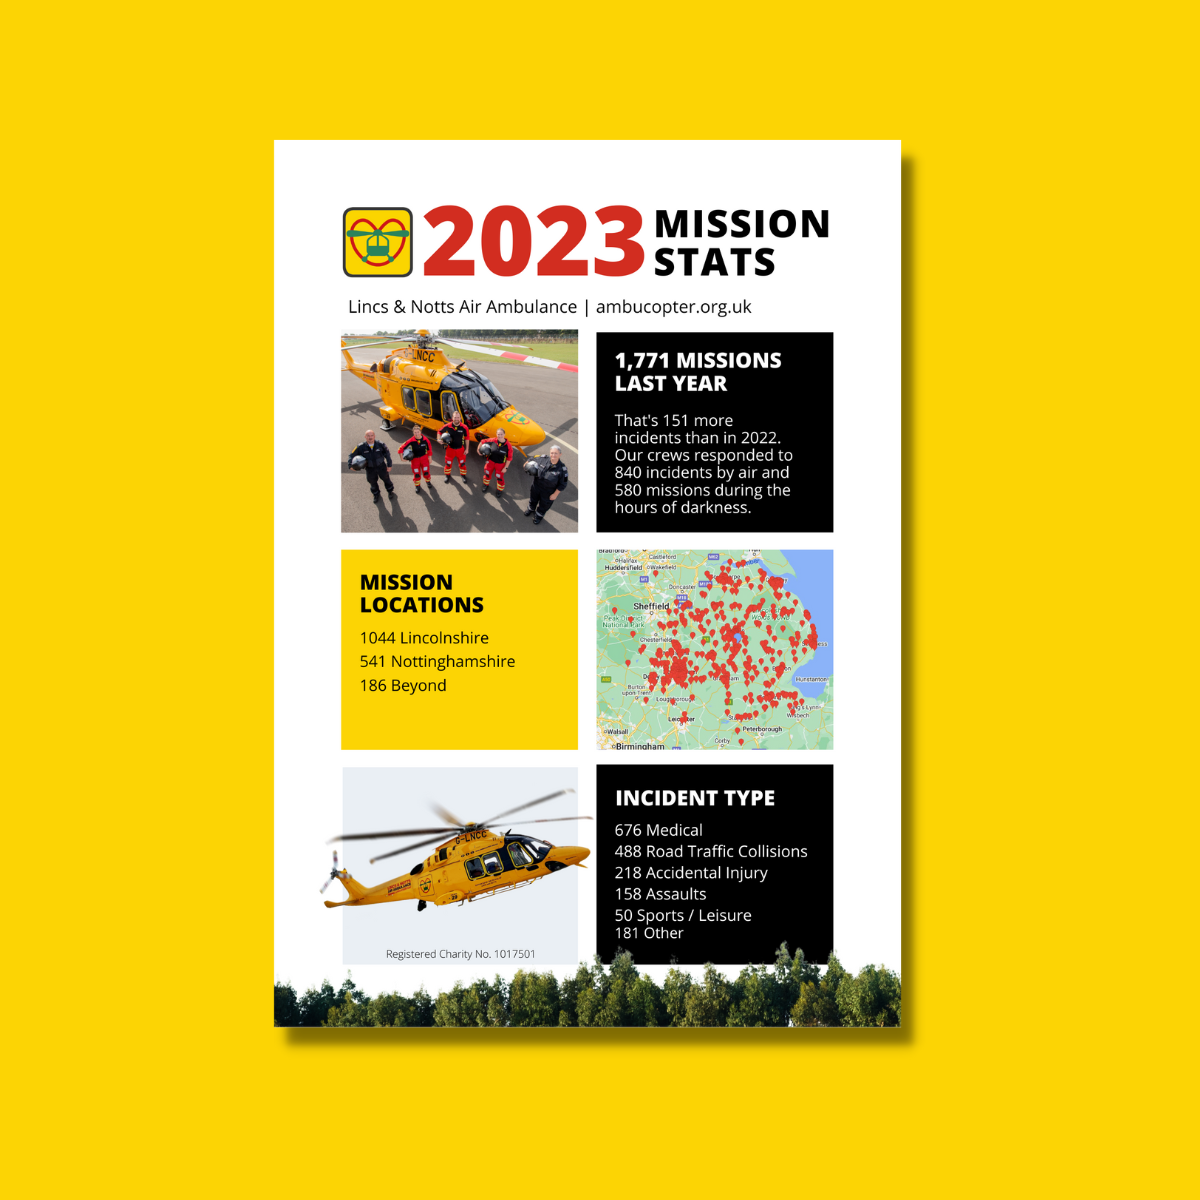 2023 Mission Stats document on yellow background